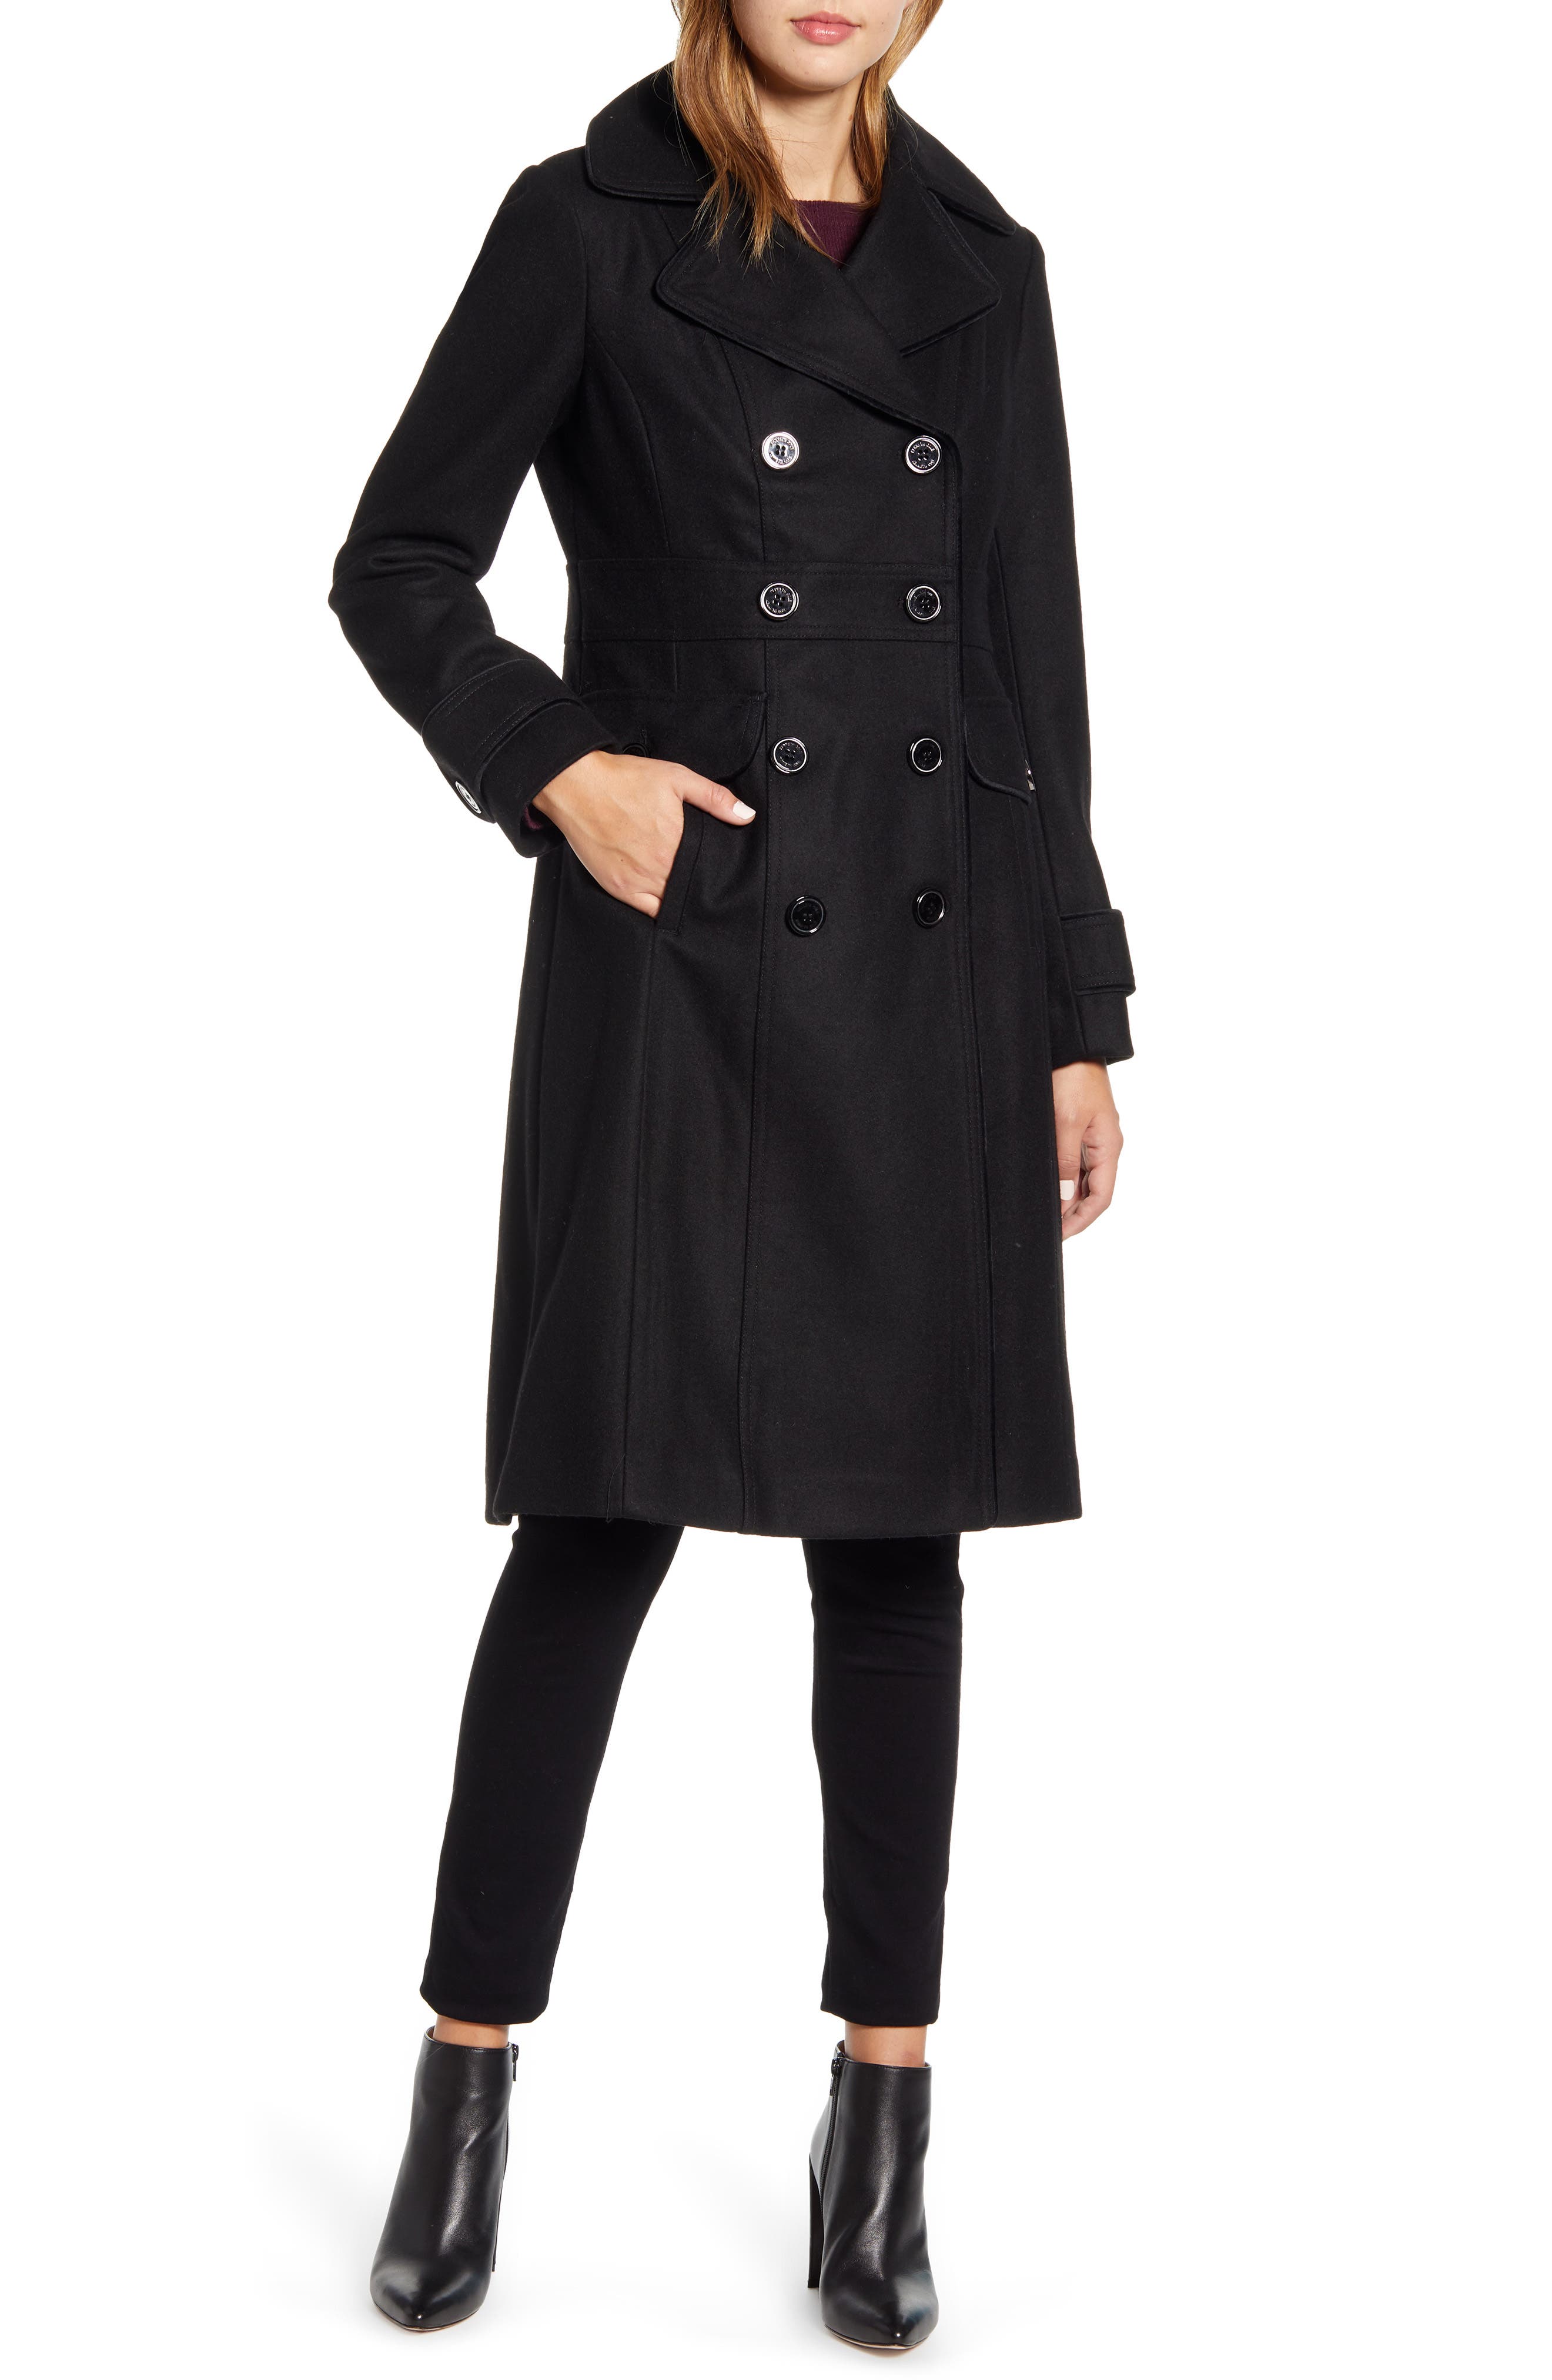 Kenneth Cole New York Winter Coats 